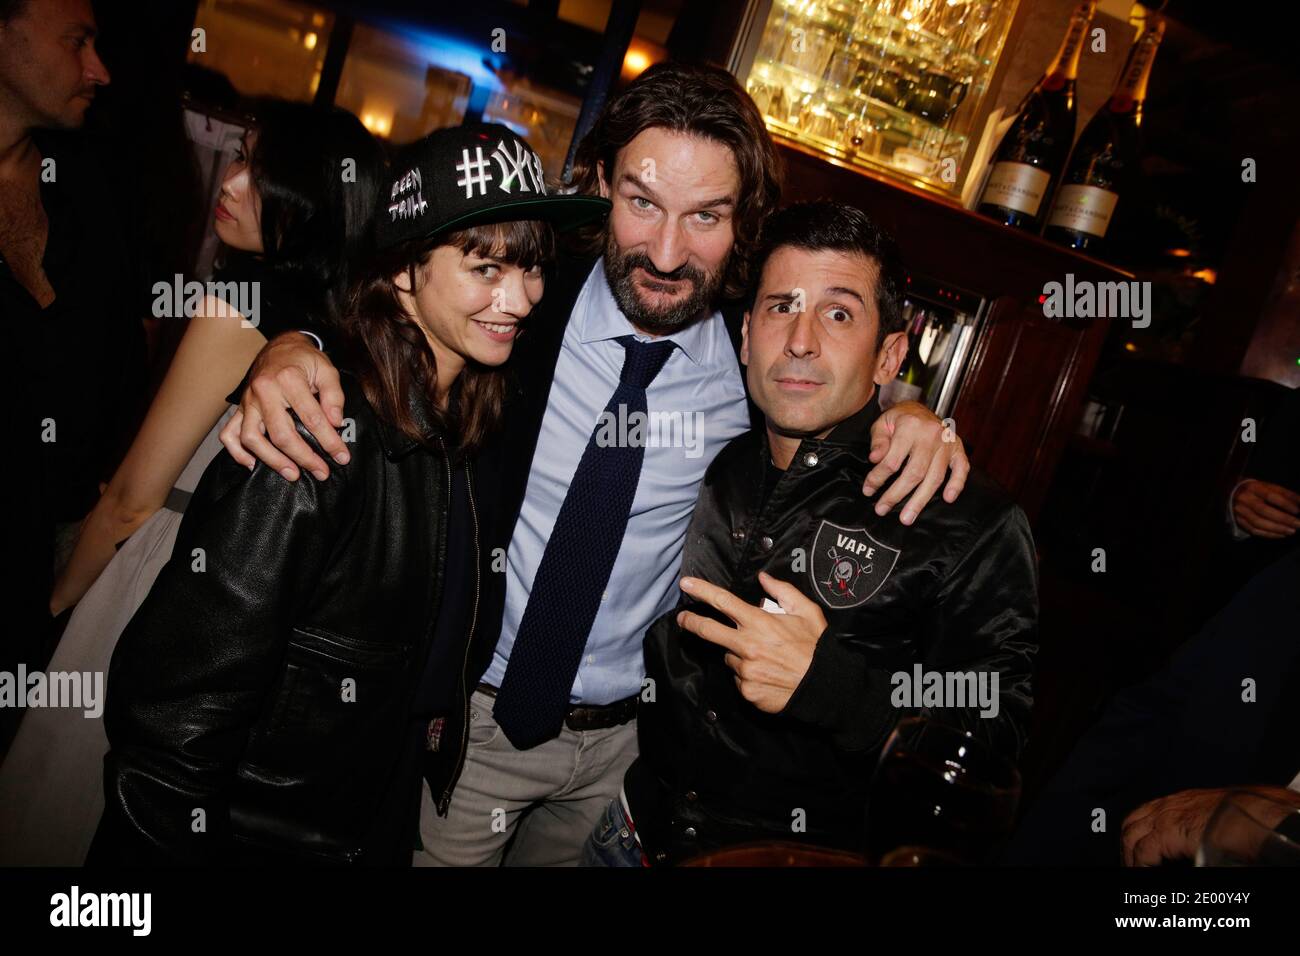 Frederic Beigbeder, Andre Saraiva and his girlfriend Zara Prassinot  attending the Prix De Flore 2013 at the 'Cafe de Flore' in Paris, France on  November 07, 2013. Photo by ABACAPRESS.COM Stock Photo - Alamy